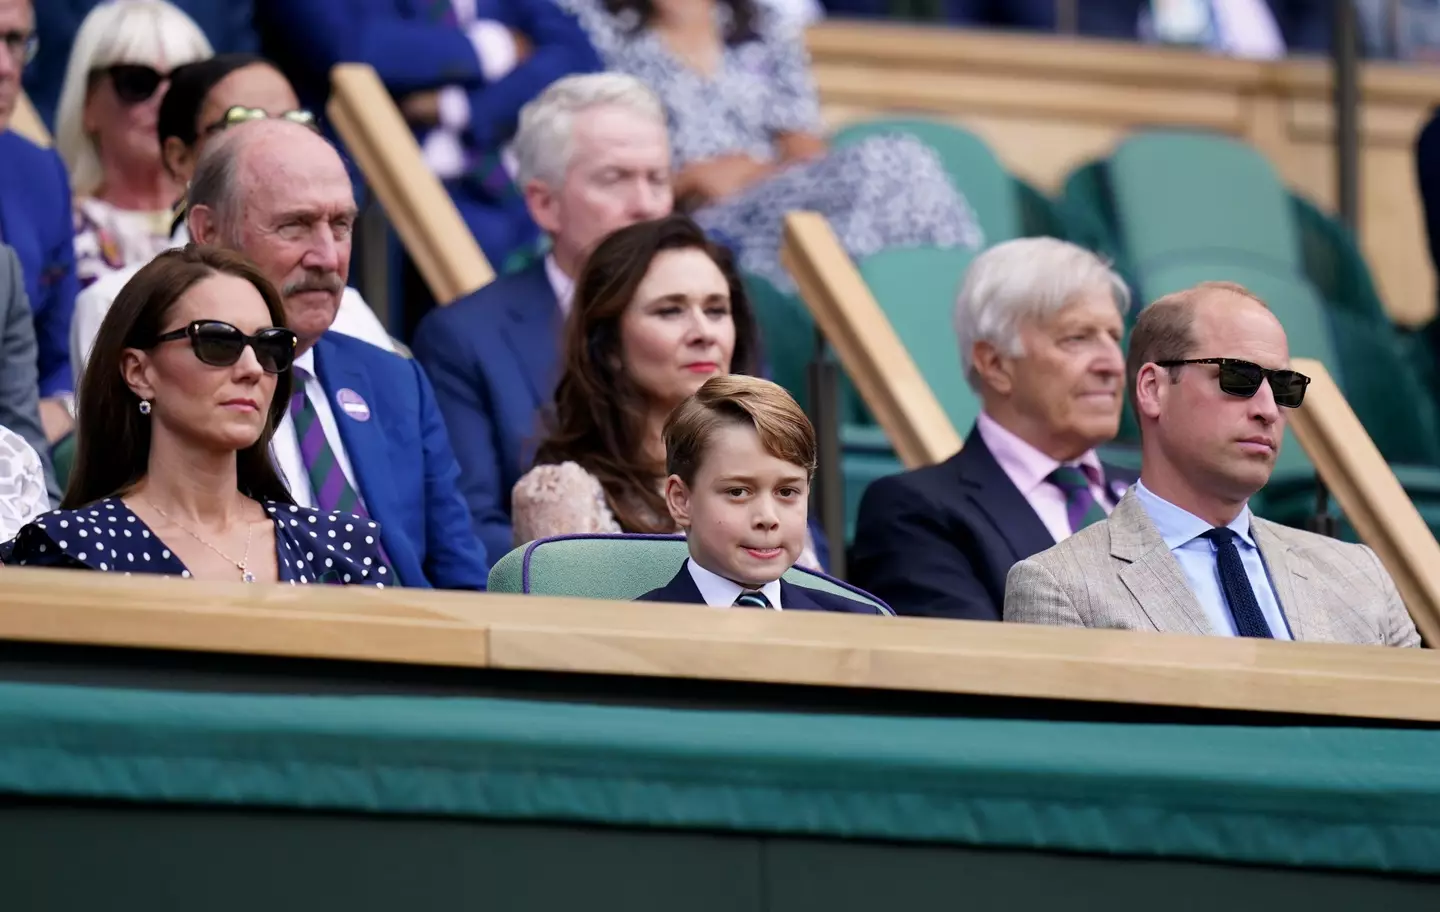 Many Wimbledon viewers were left far from impressed despite a video of Prince William checking in with his son.